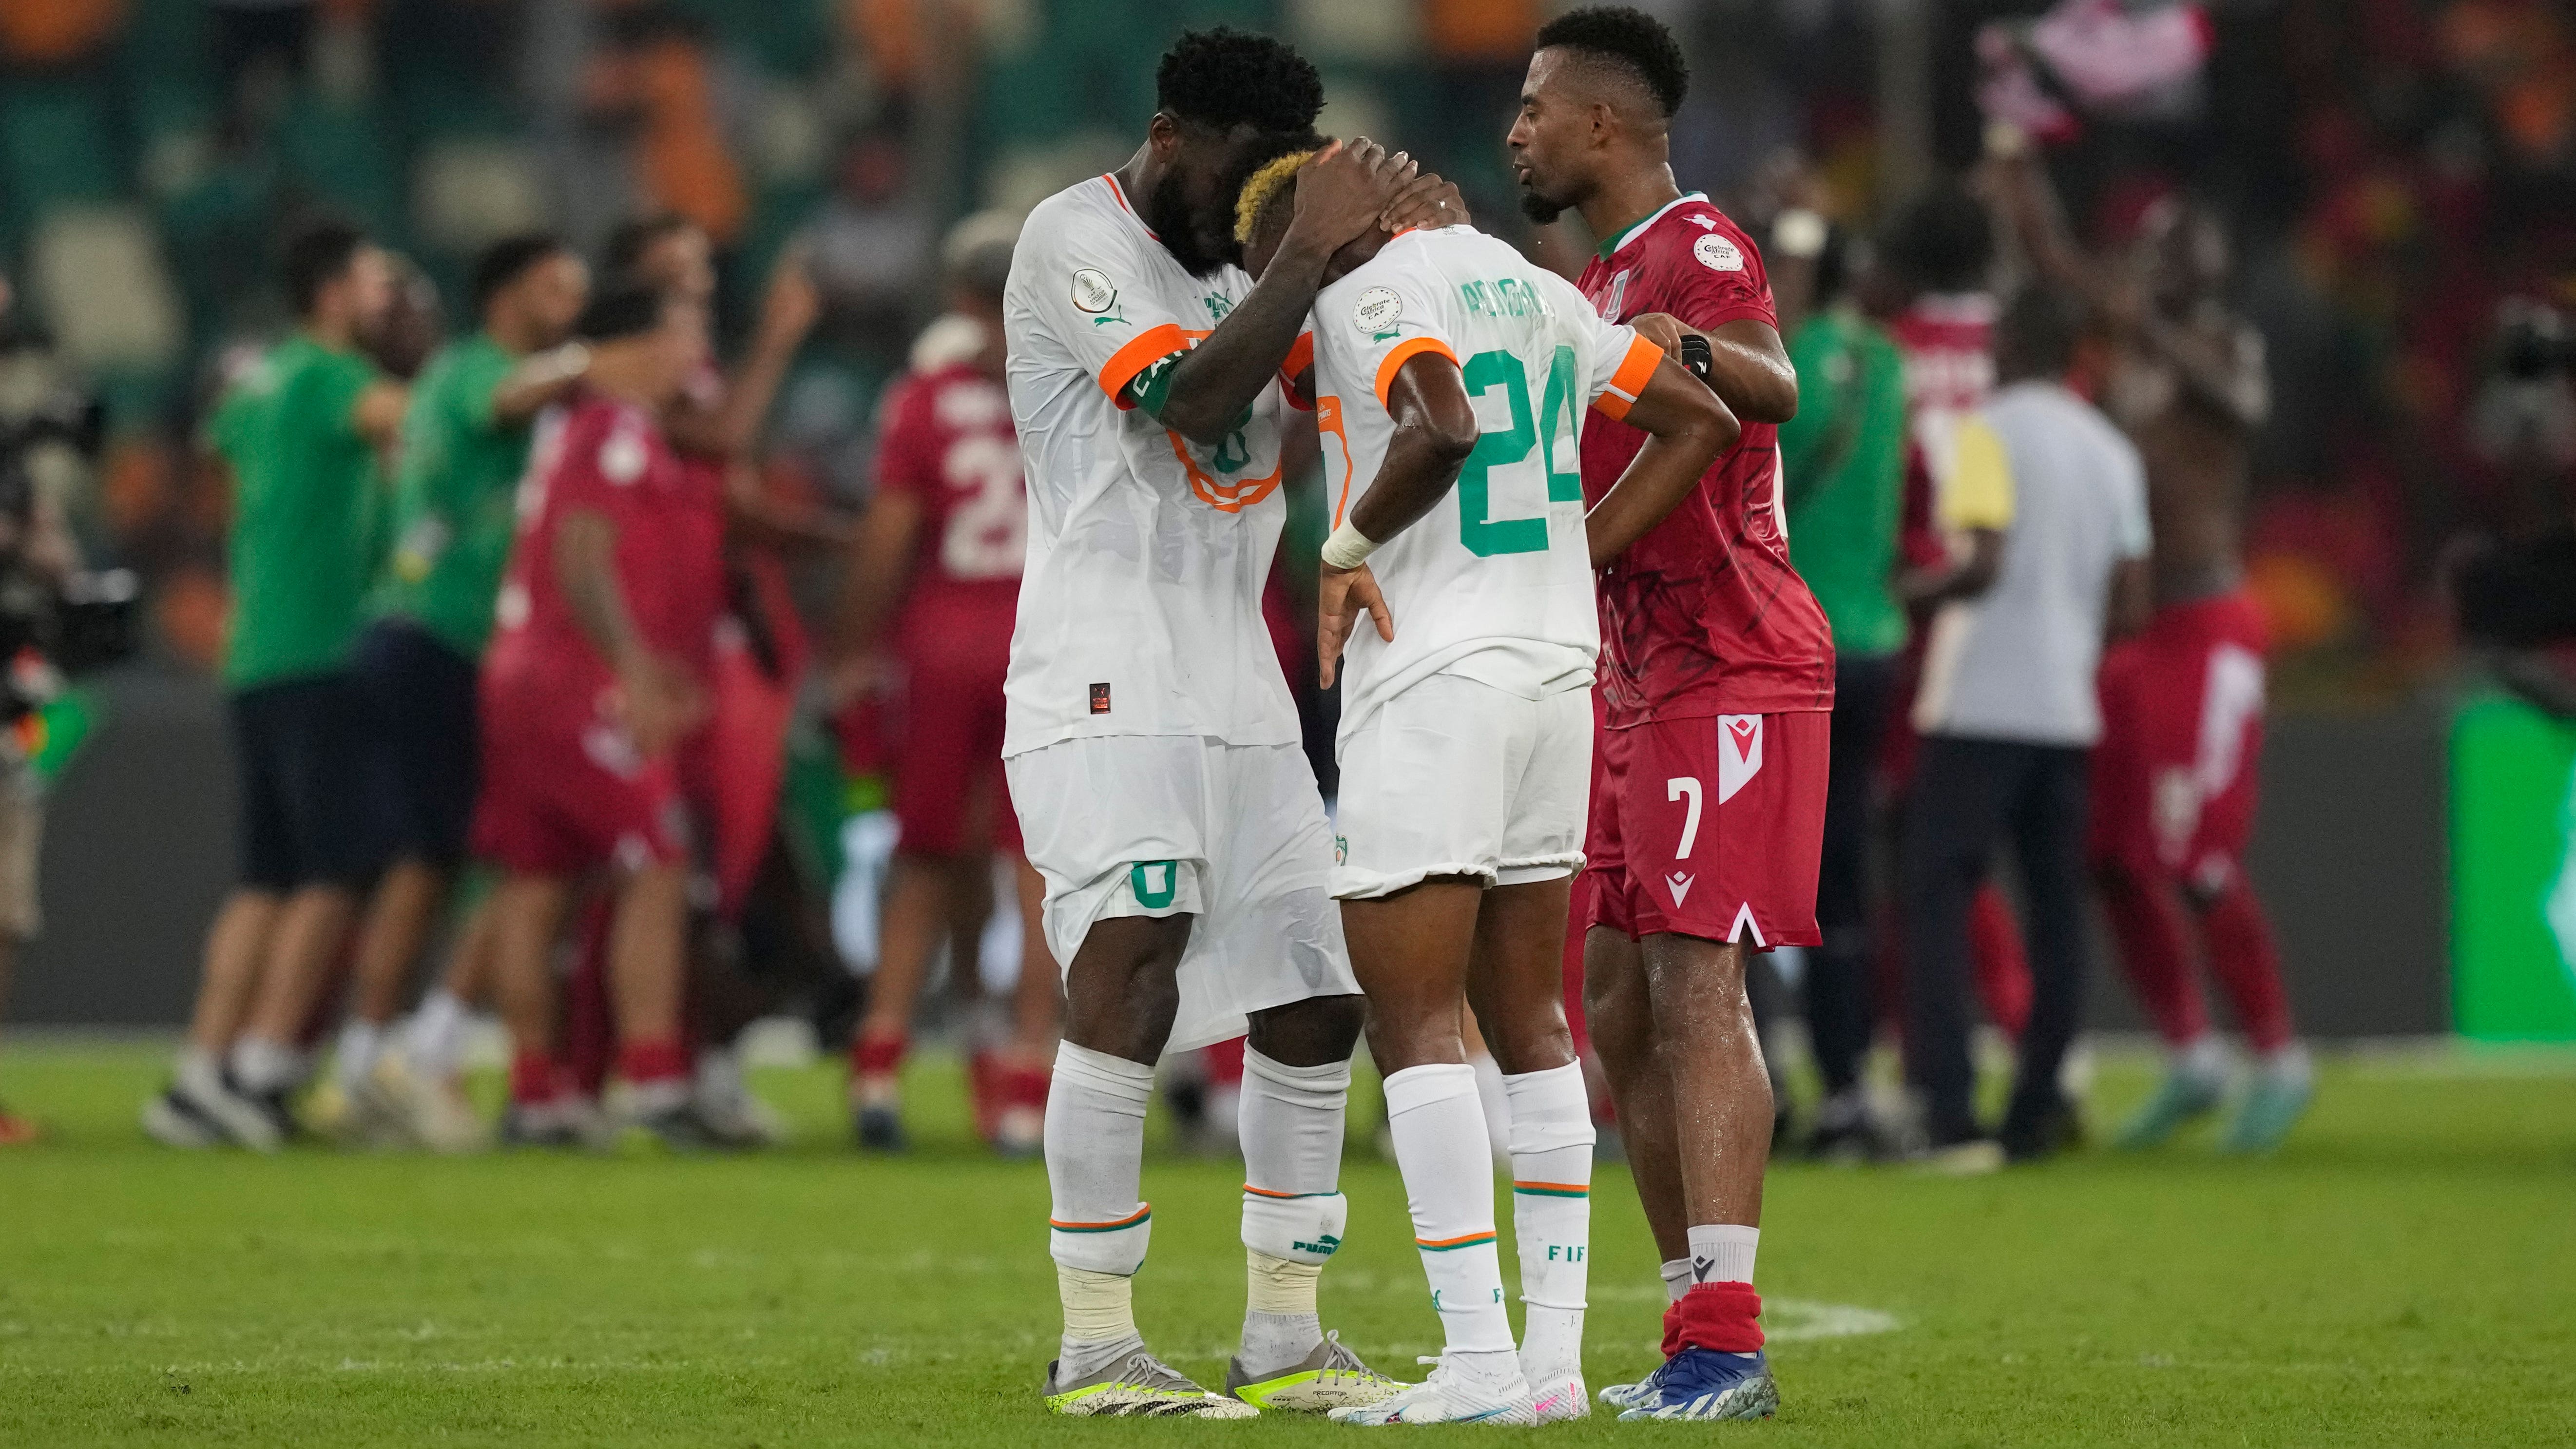 Ivory Coast’s AFCON hopes hanging by thread after big loss to Equatorial Guinea